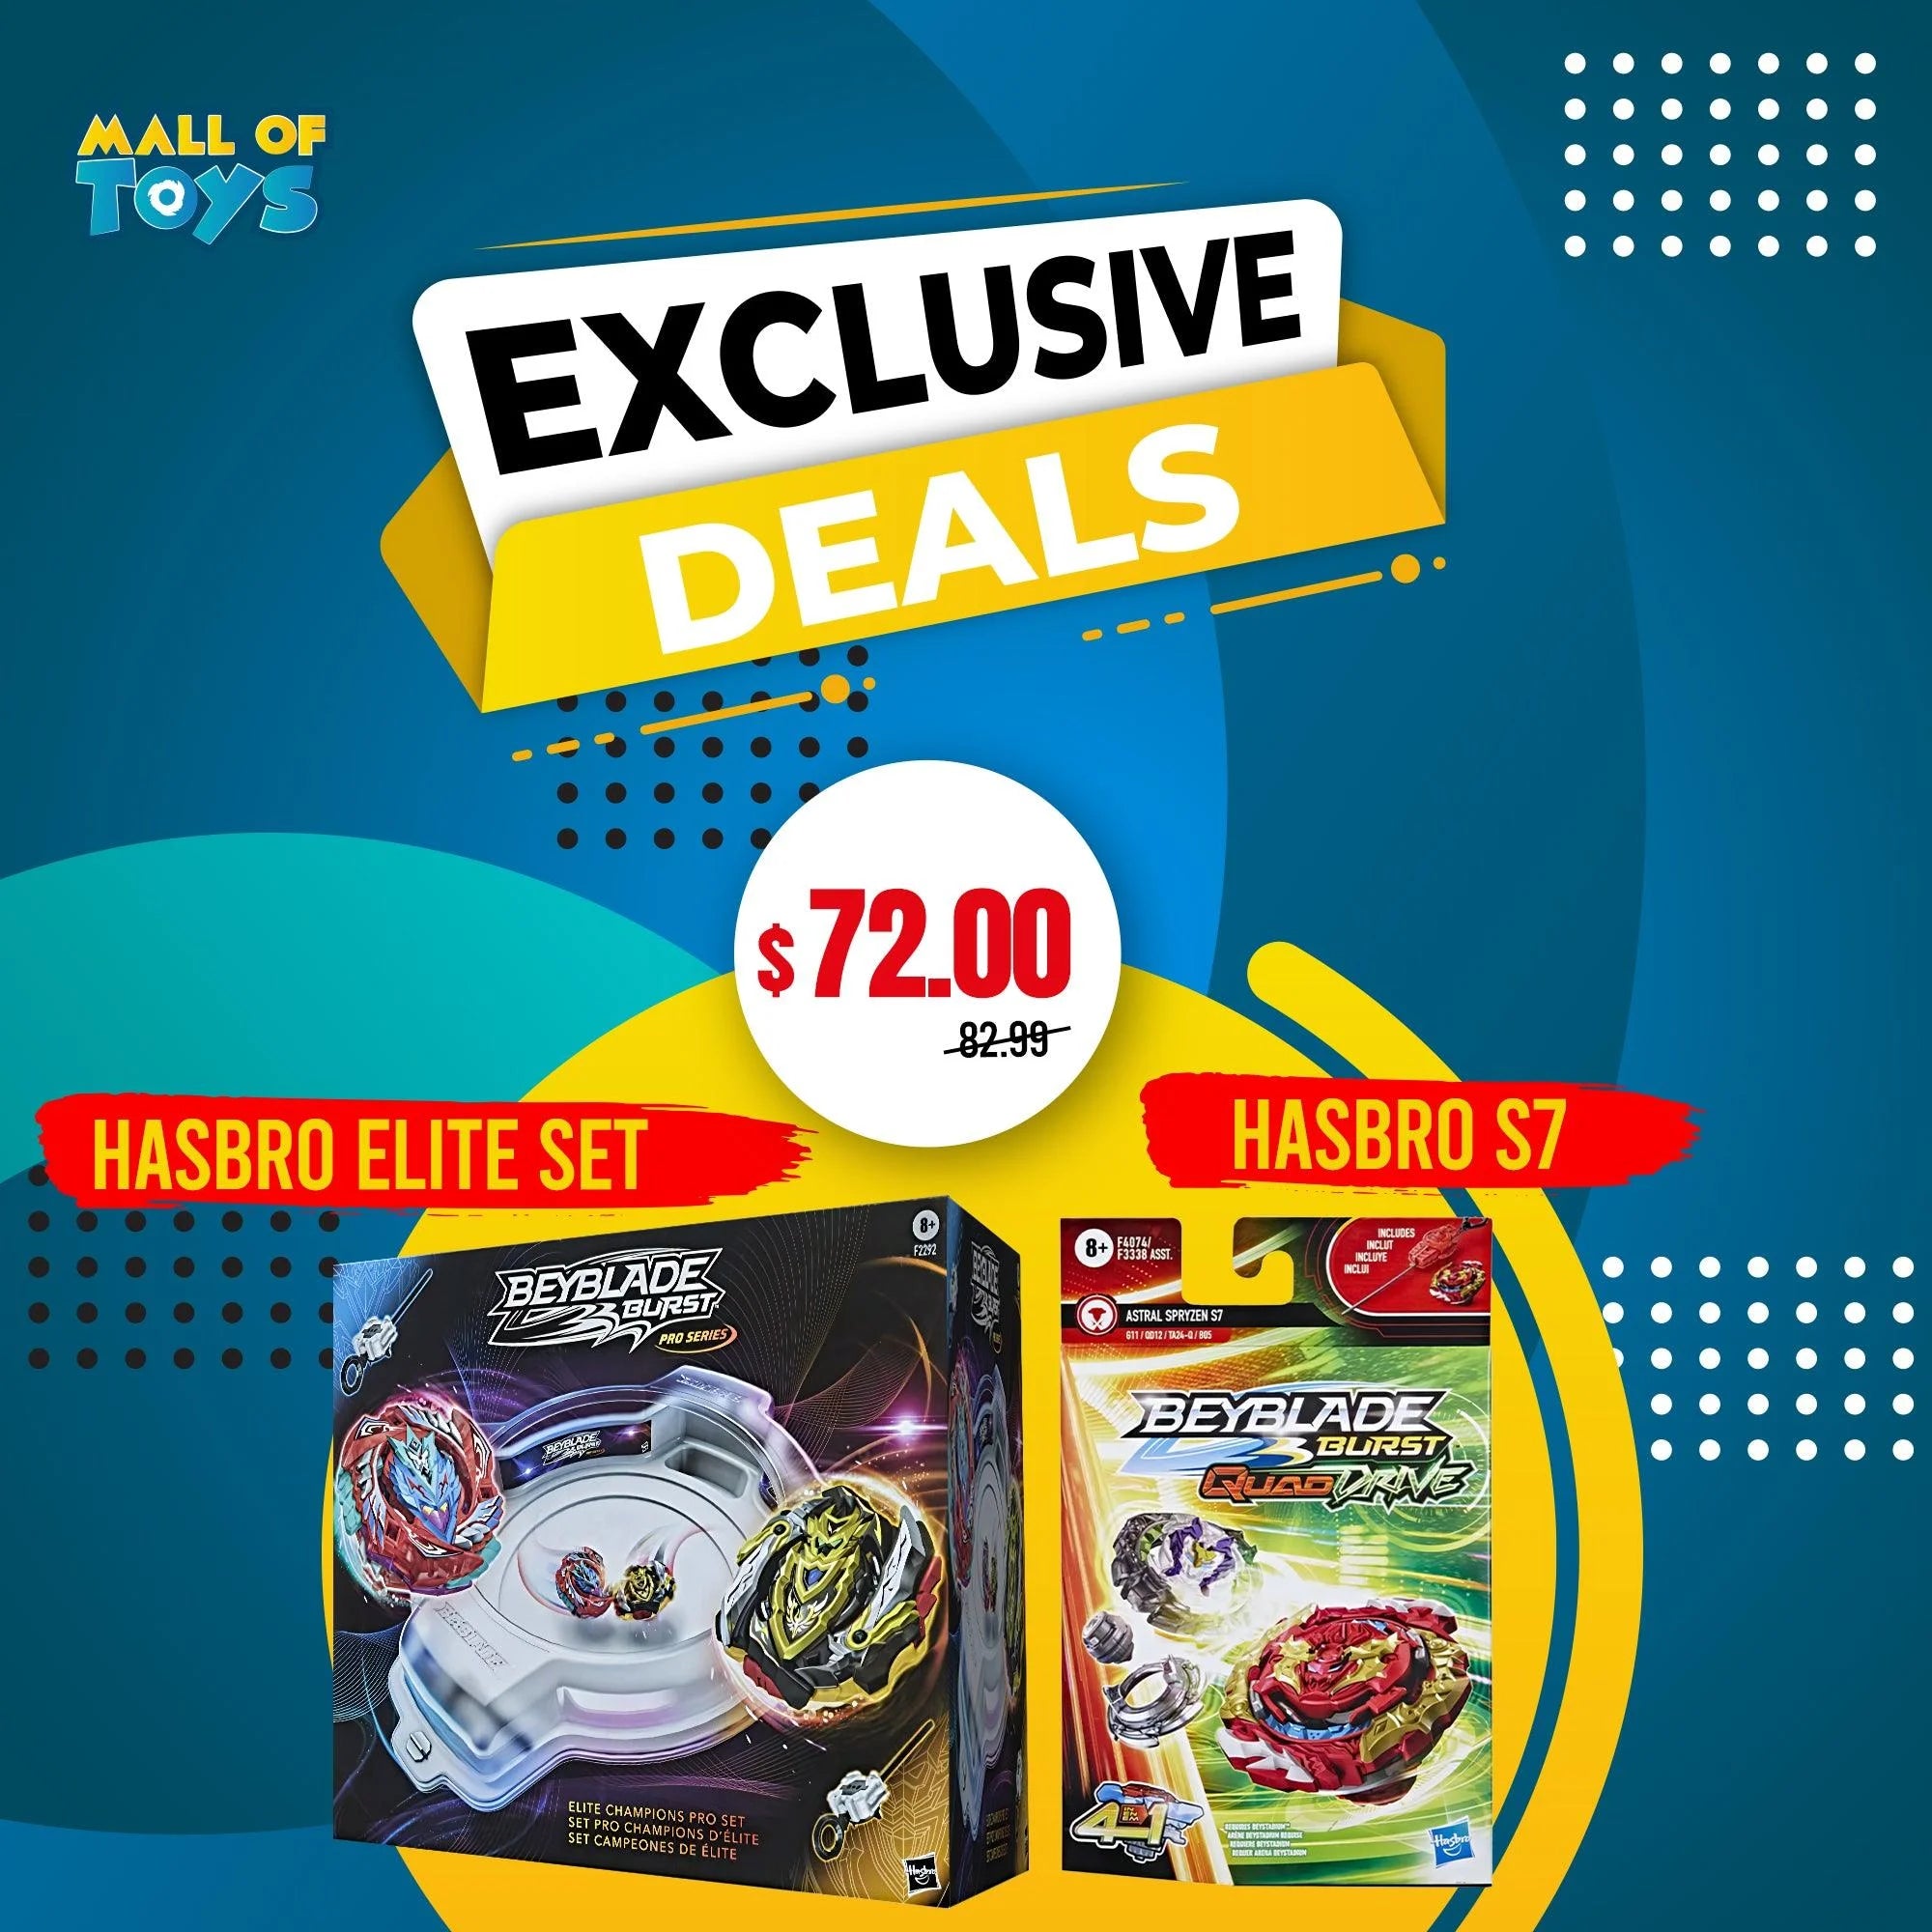 SUNDAY EXCLUSIVE !!! Hasbro Elite Champions Set and Hasbro S7 - Set of Two-  LIMITED DEALS!!!